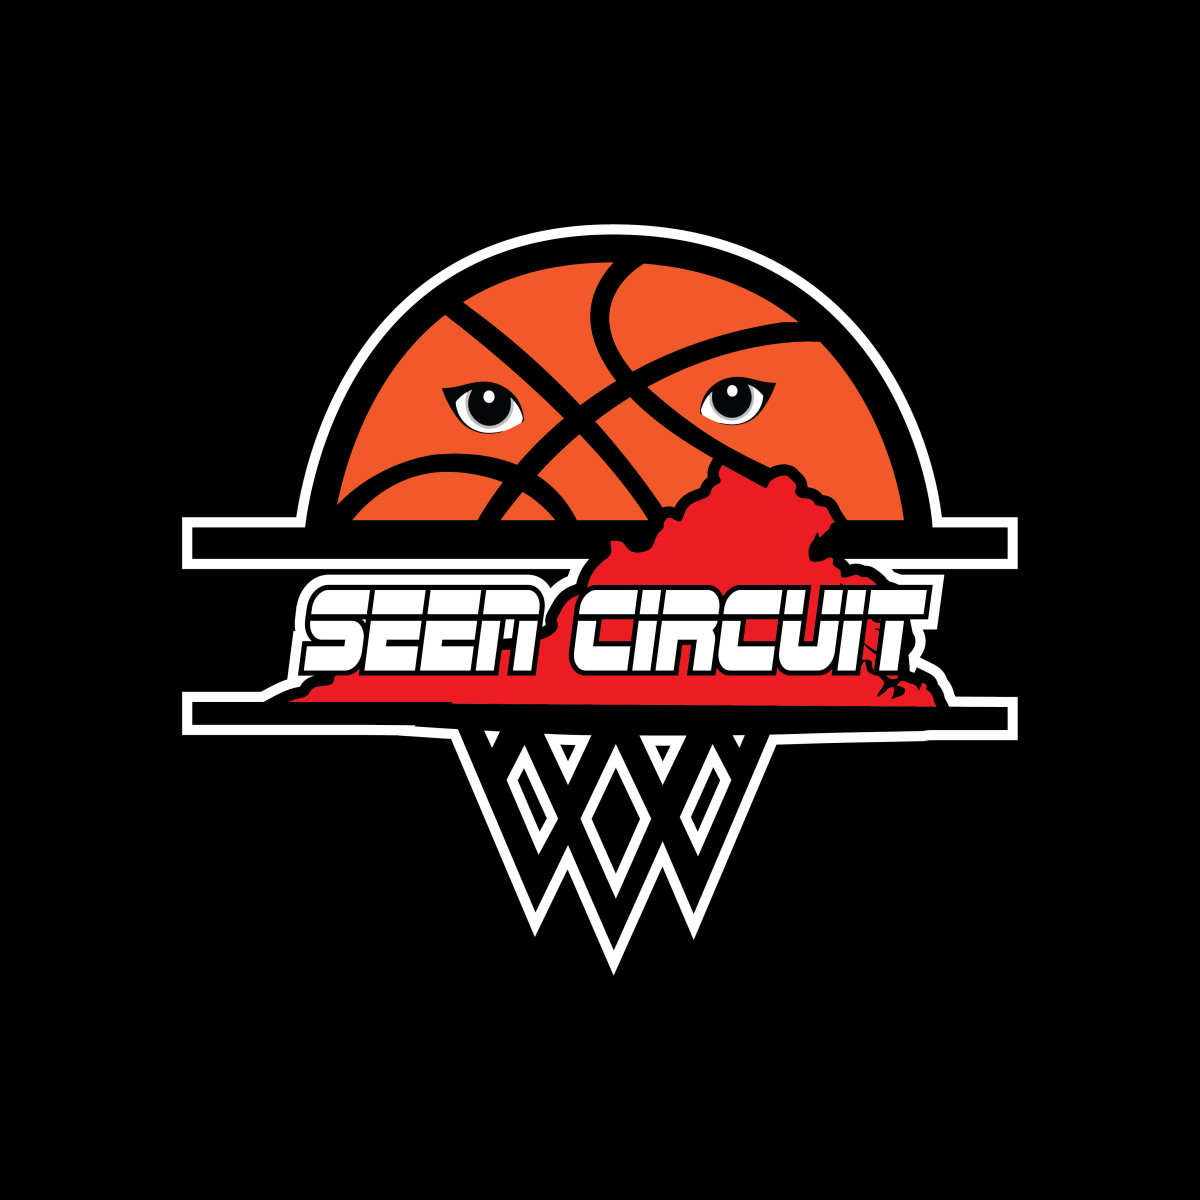 The Seen Circuit will allow players in Virginia a chance to be seen by colleges. (Photo: Welsh)